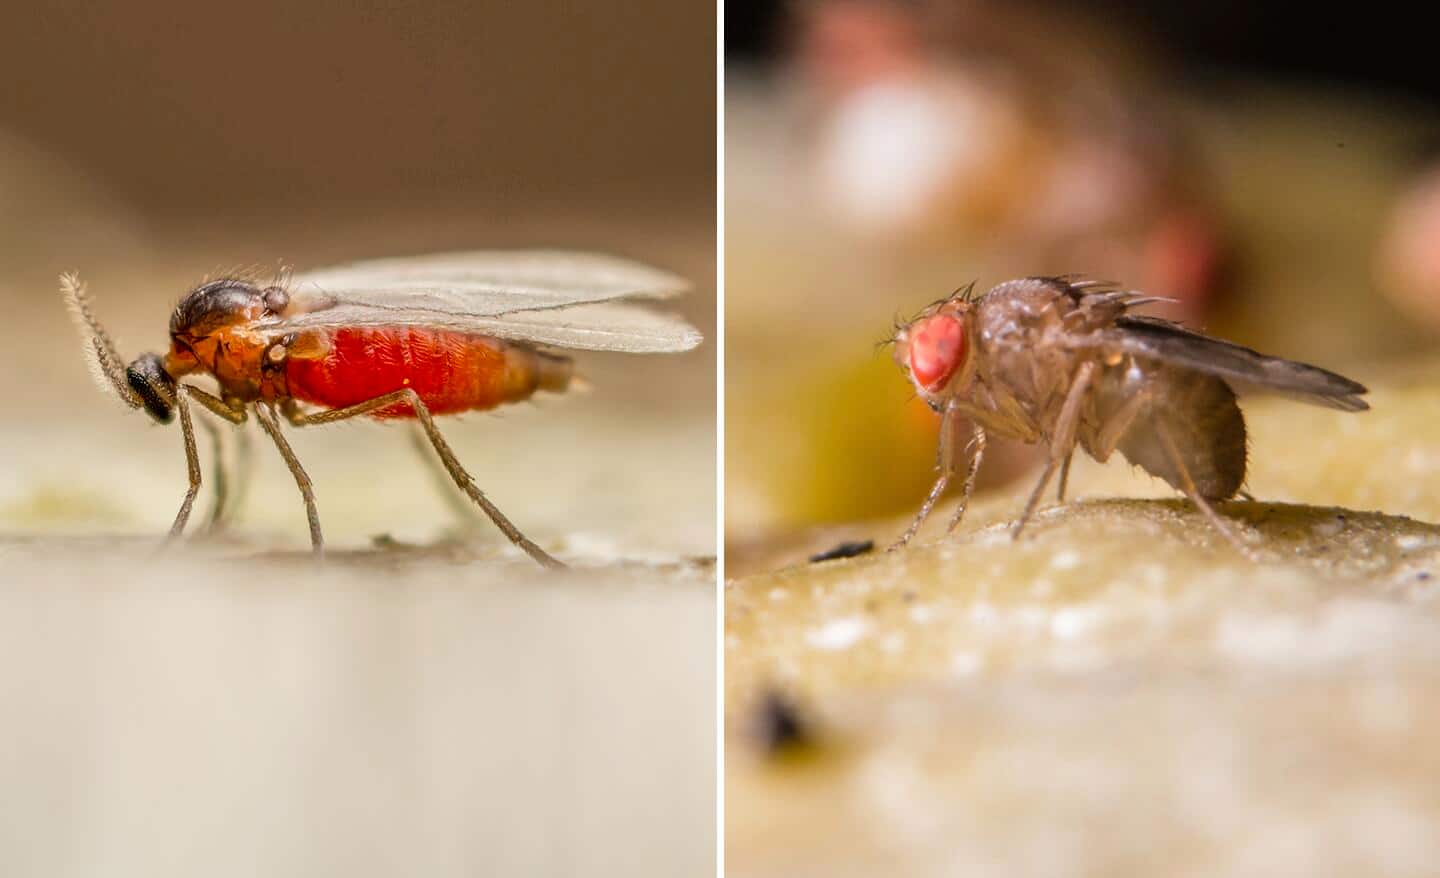 A fungus gnat placed next to a common fruit fly.